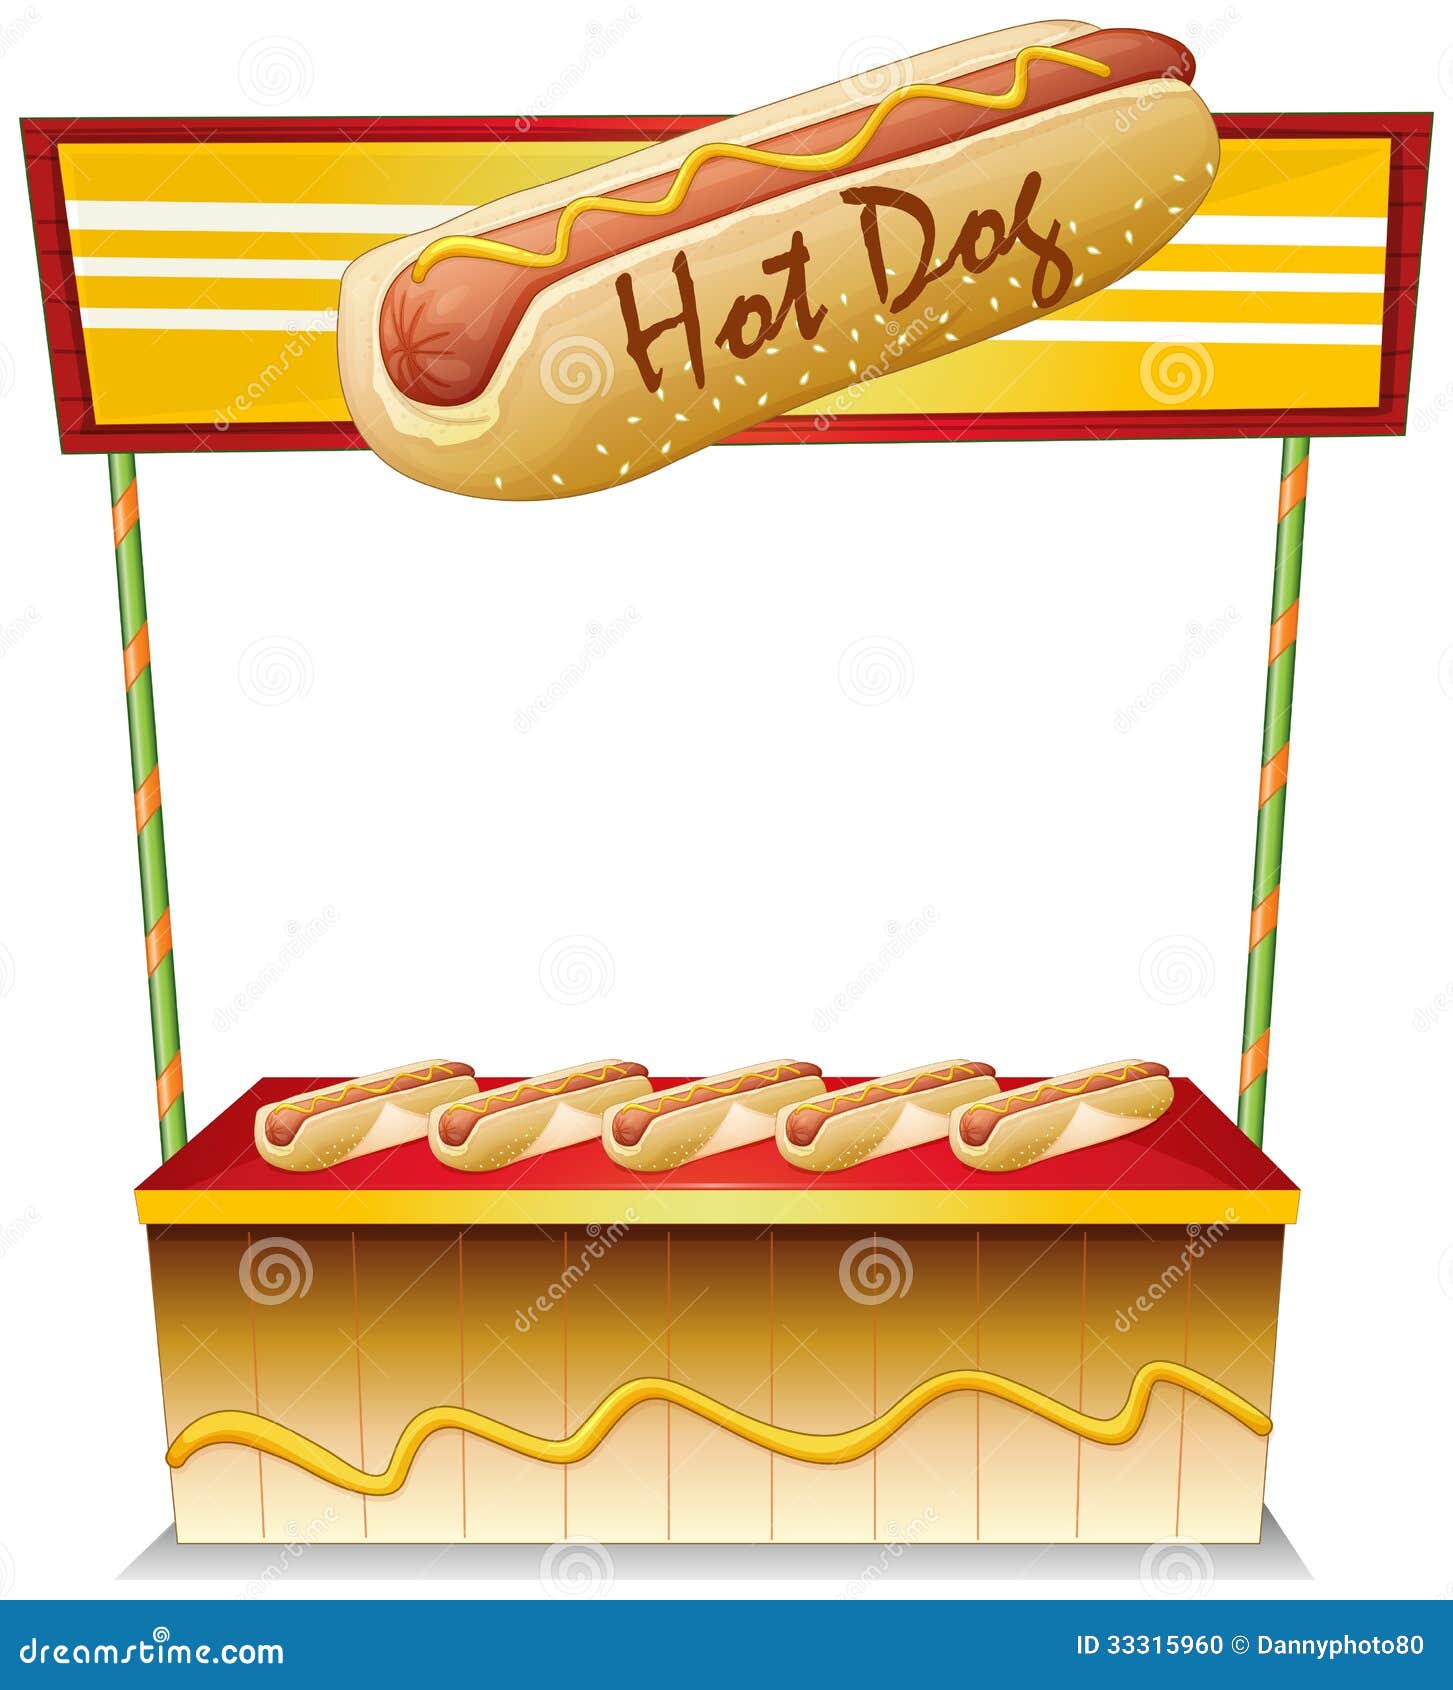 clipart hot dog stand - photo #6